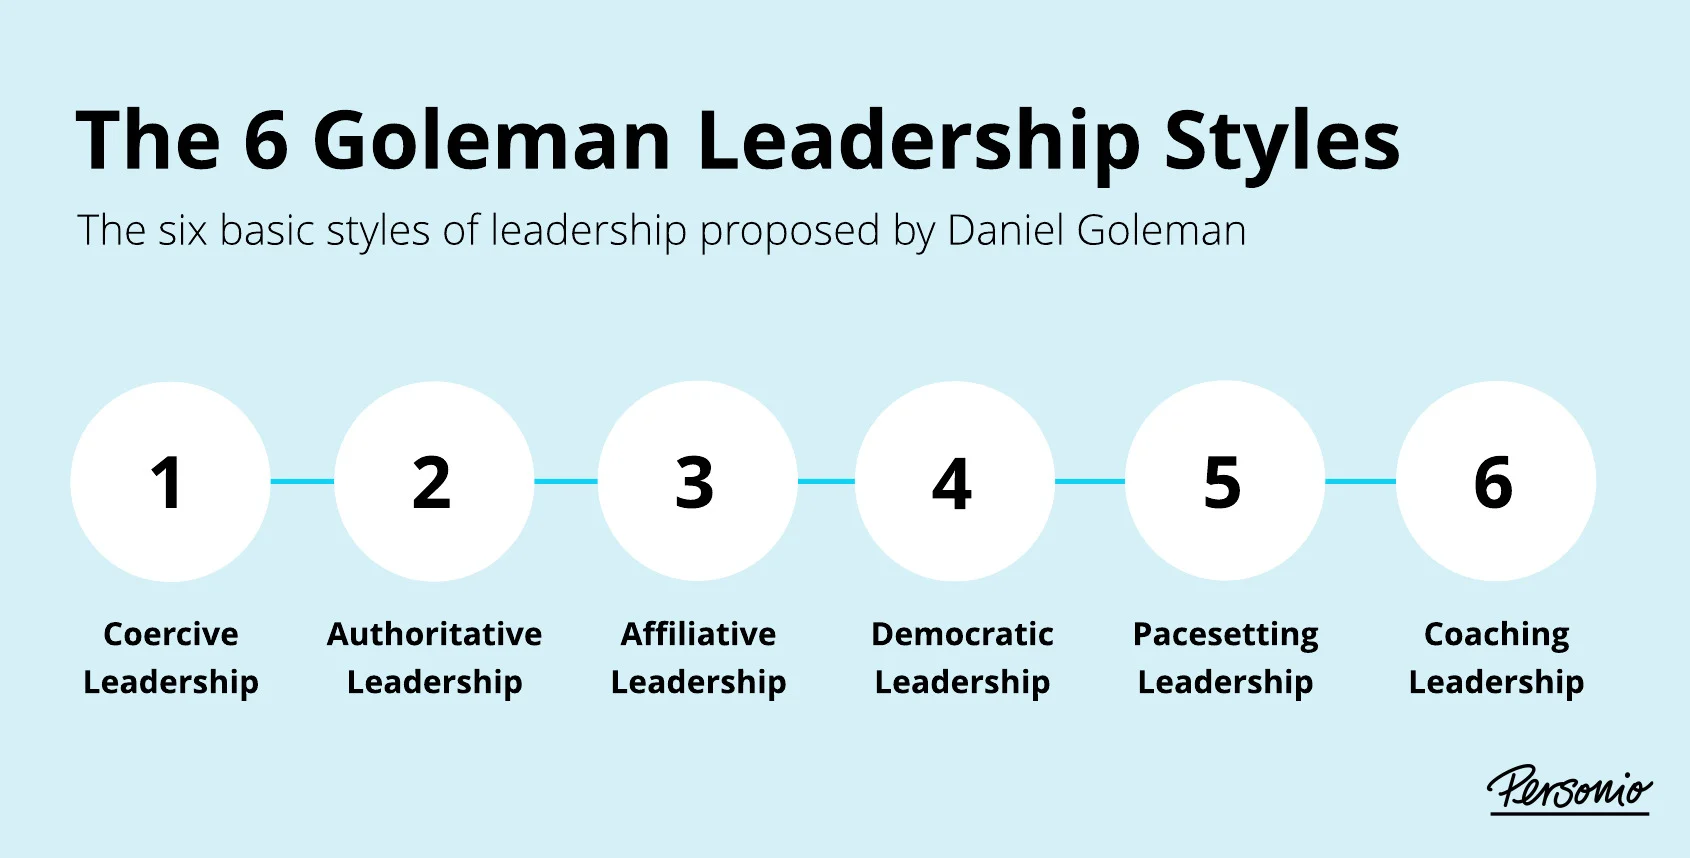 Goleman Leadership Styles, Know The 6 Types of Leadership